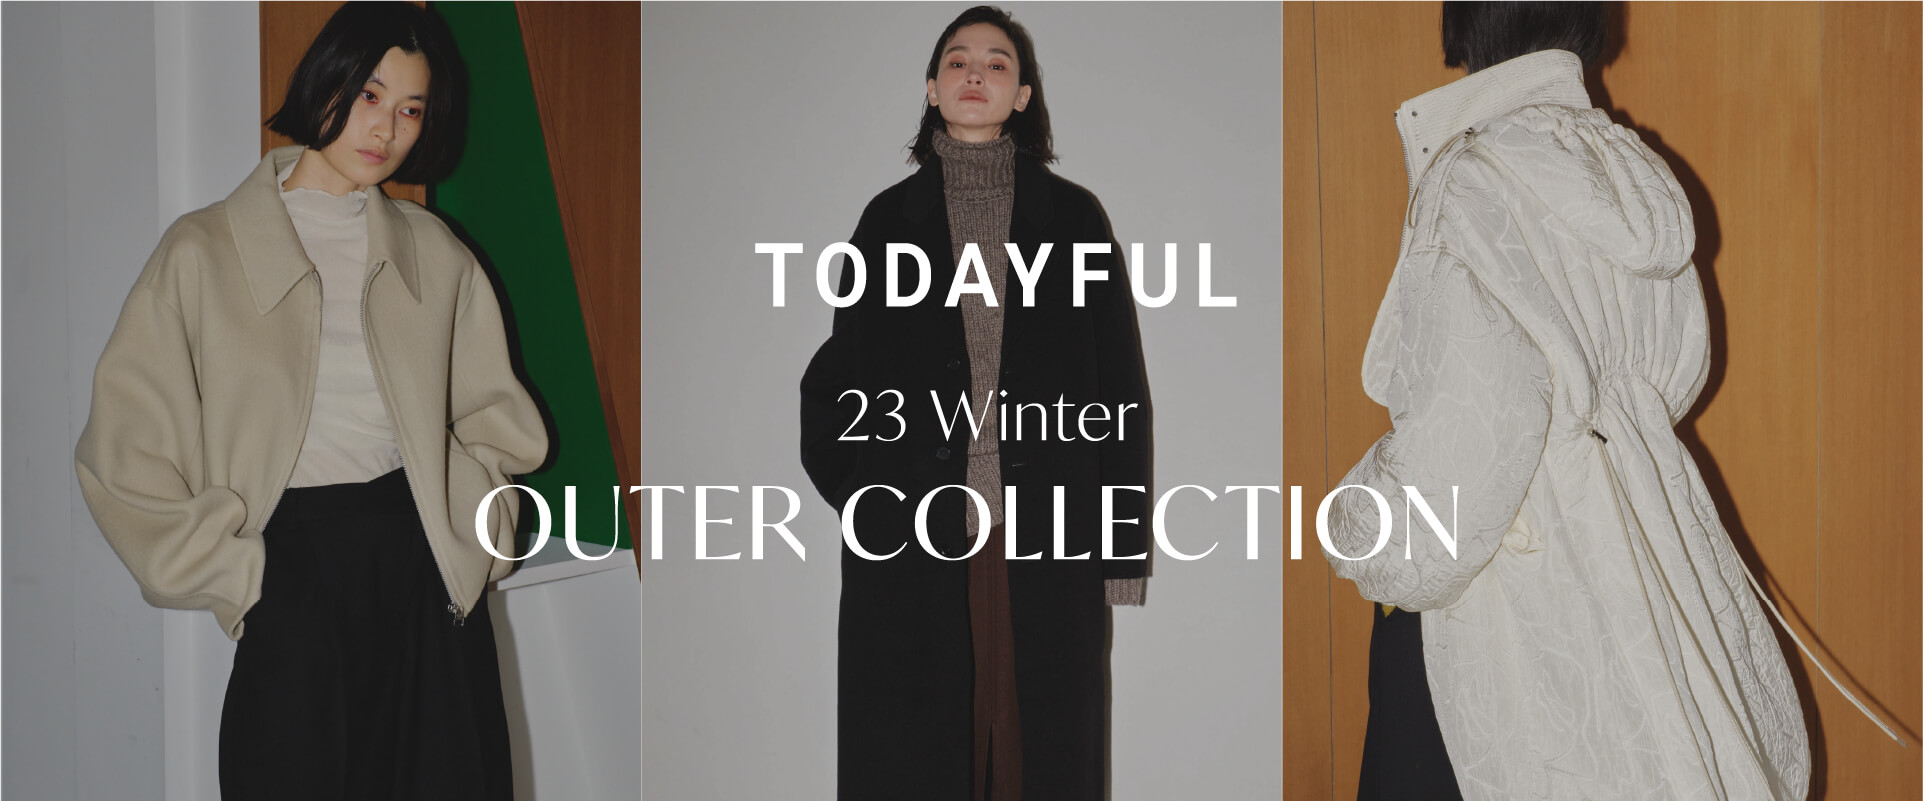 TODAYFUL 23 Winter OUTER COLLECTION